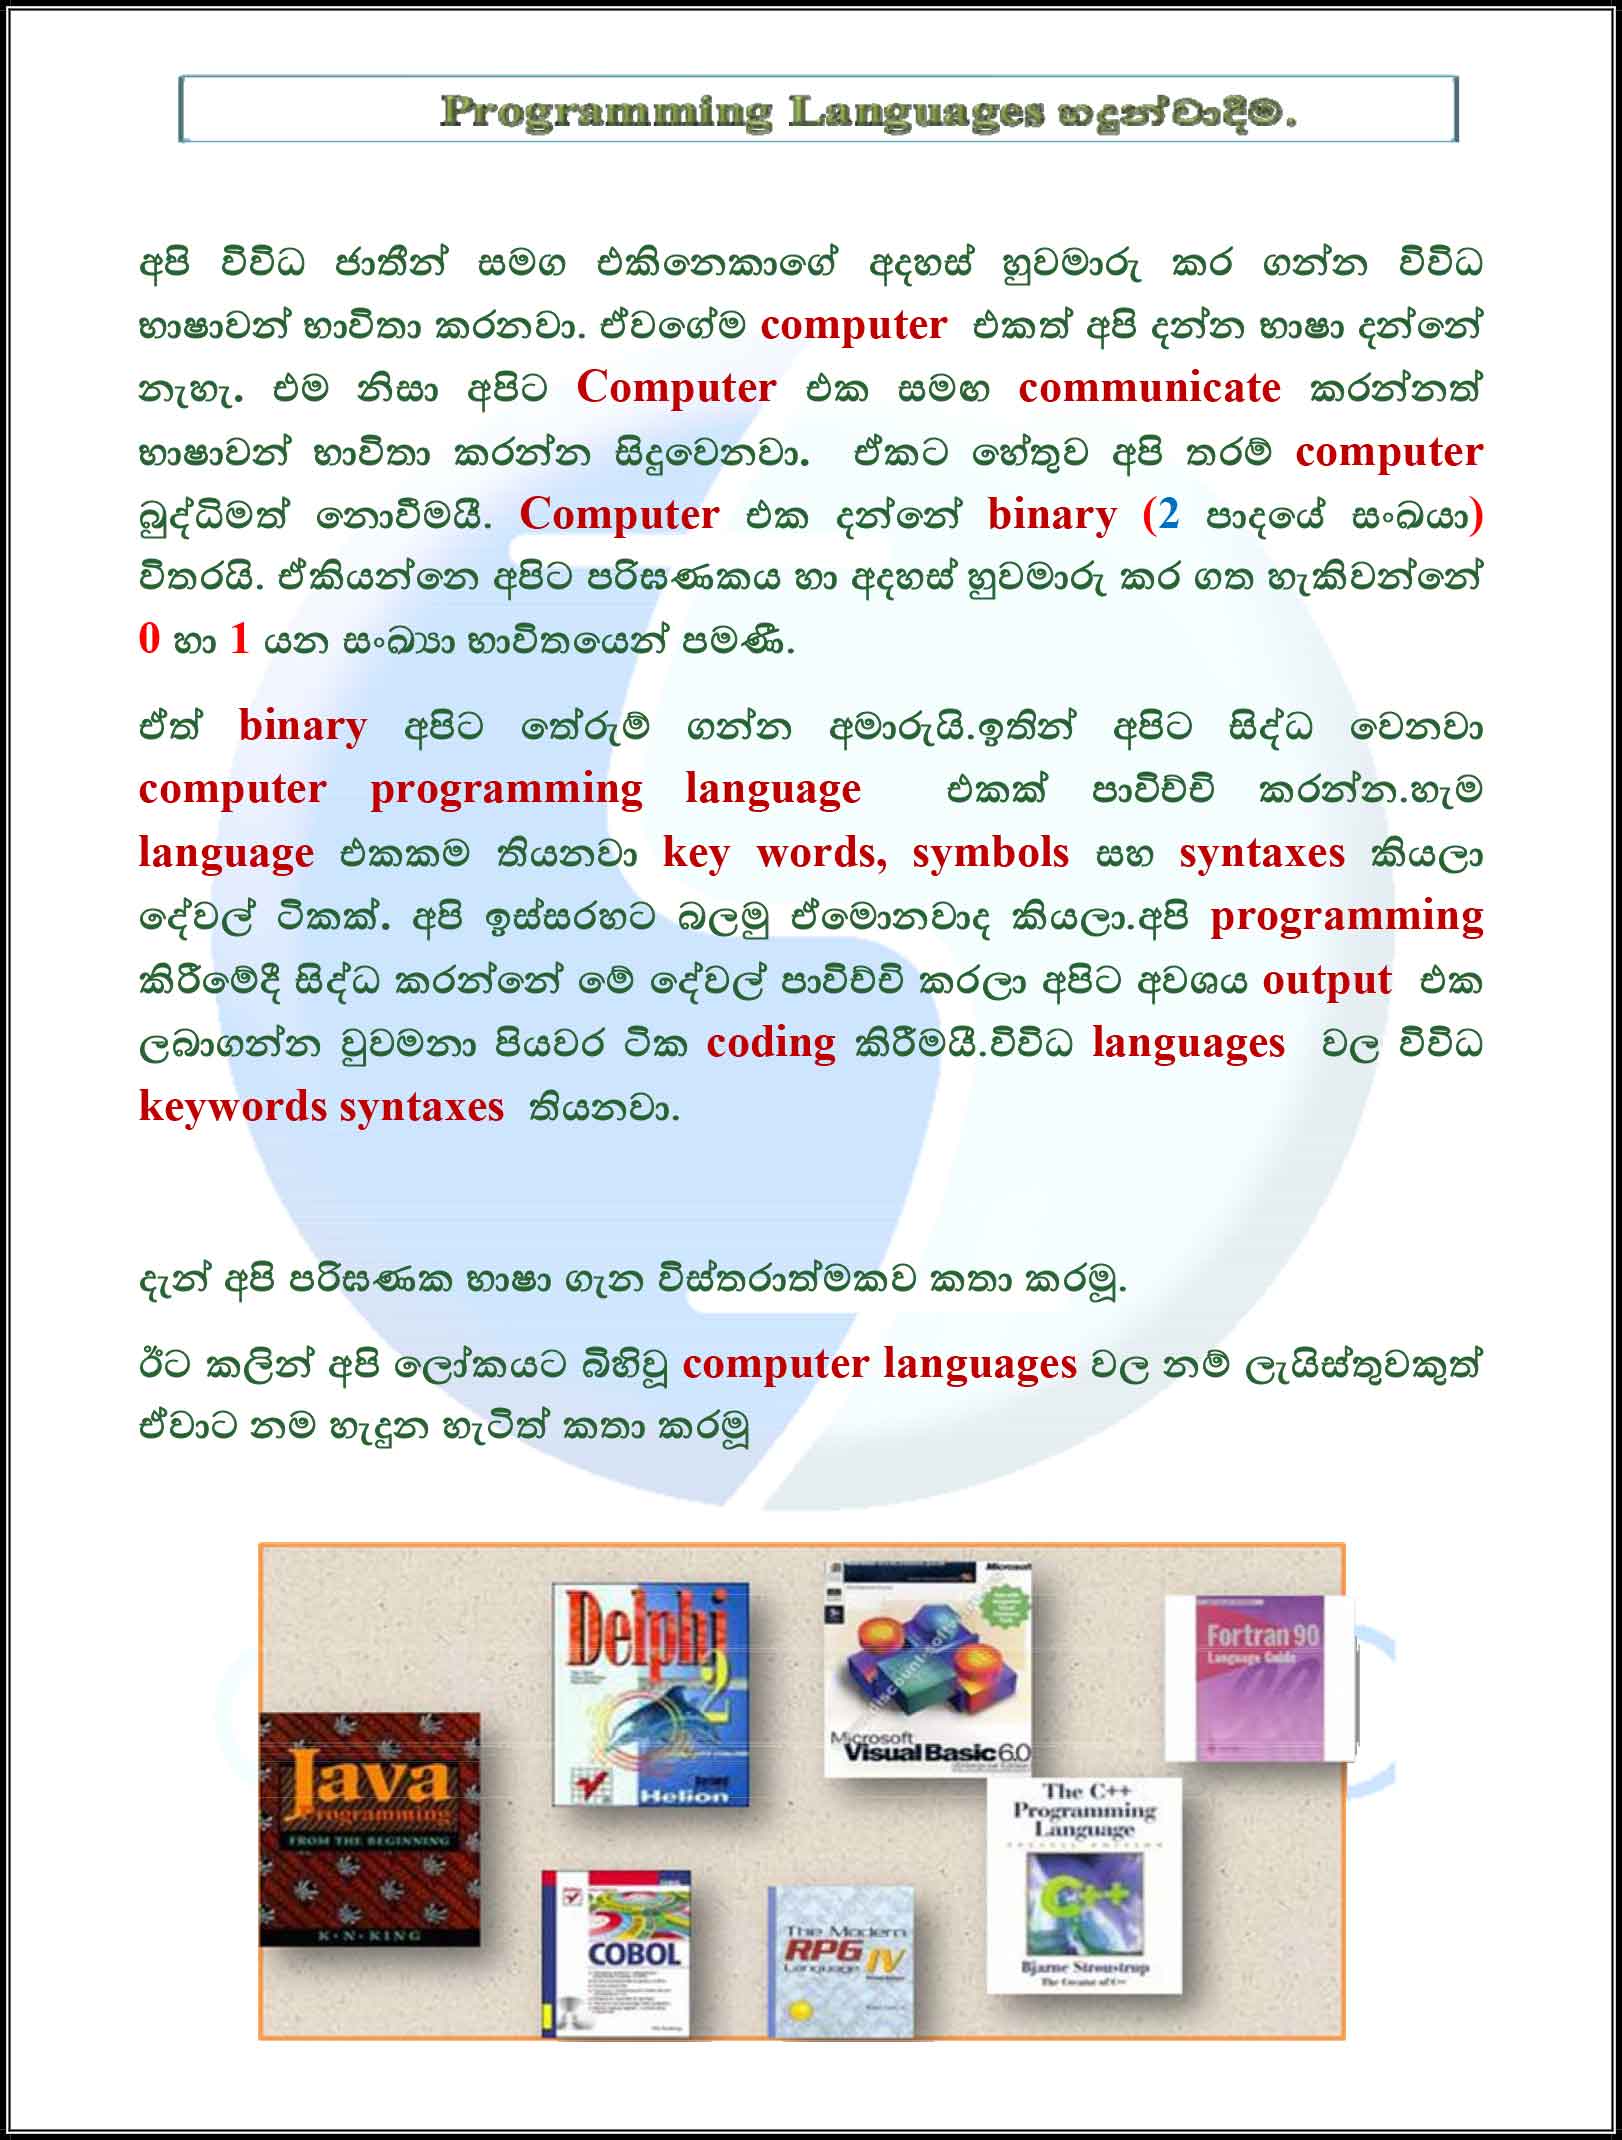 Introduction to Programming Languages in Sinhala